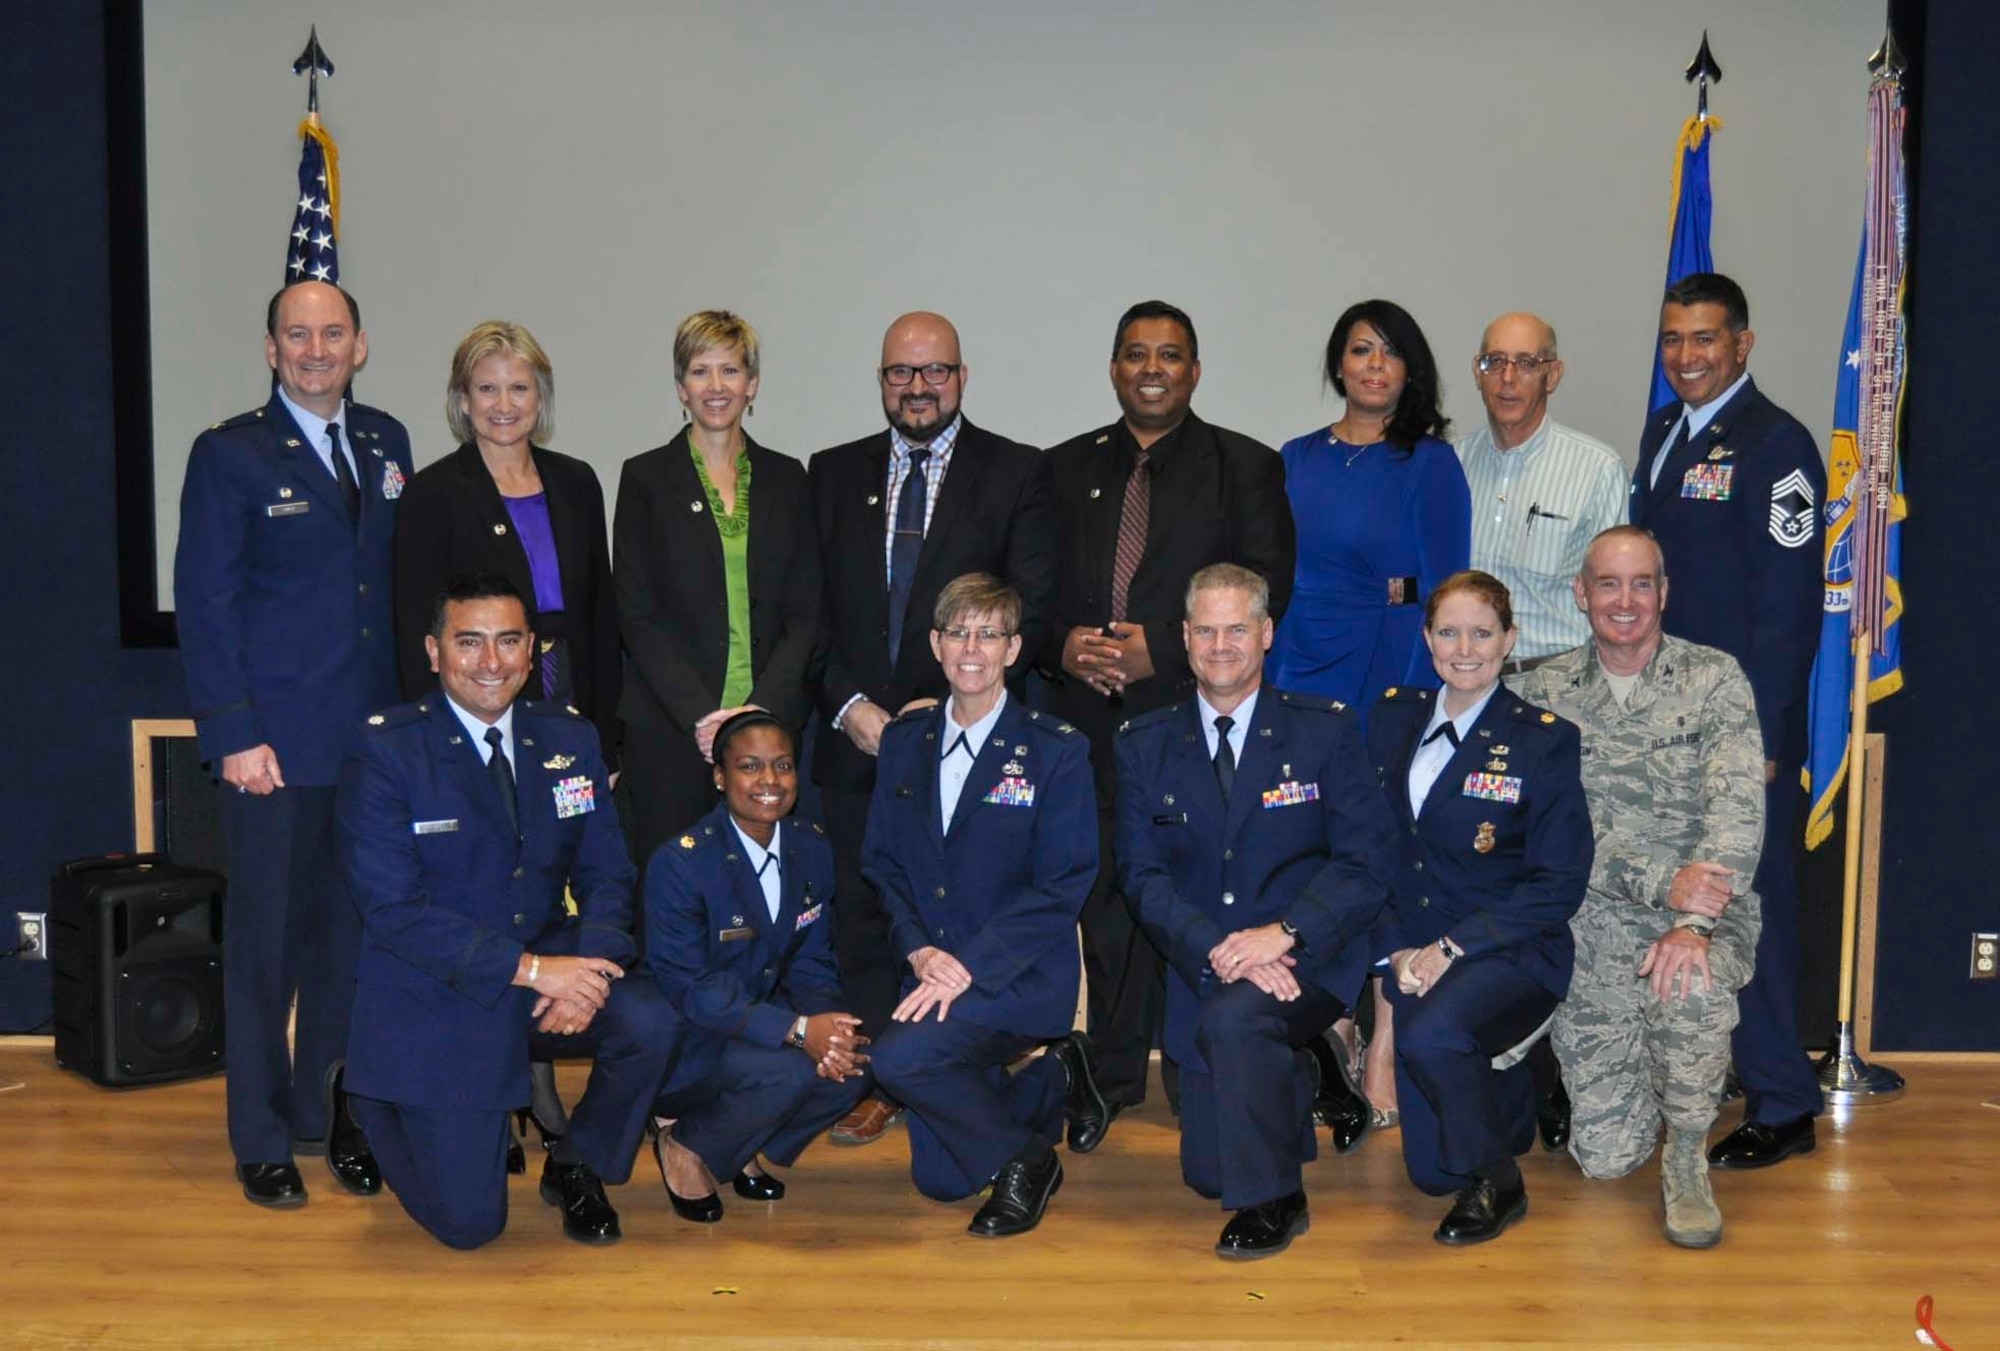 Six Alamo Wing honorary commanders were officially inducted into the 433rd Airlift Wing’s Honorary Commander program during a ceremony held at Joint Base San Antonio-Lackland April 30, 2016. The make-up ceremony was held to accommodate those honorary commanders who were not able to attend the ceremony last month. (U.S. Air Force photo/Senior Airman Bryan Swink) 